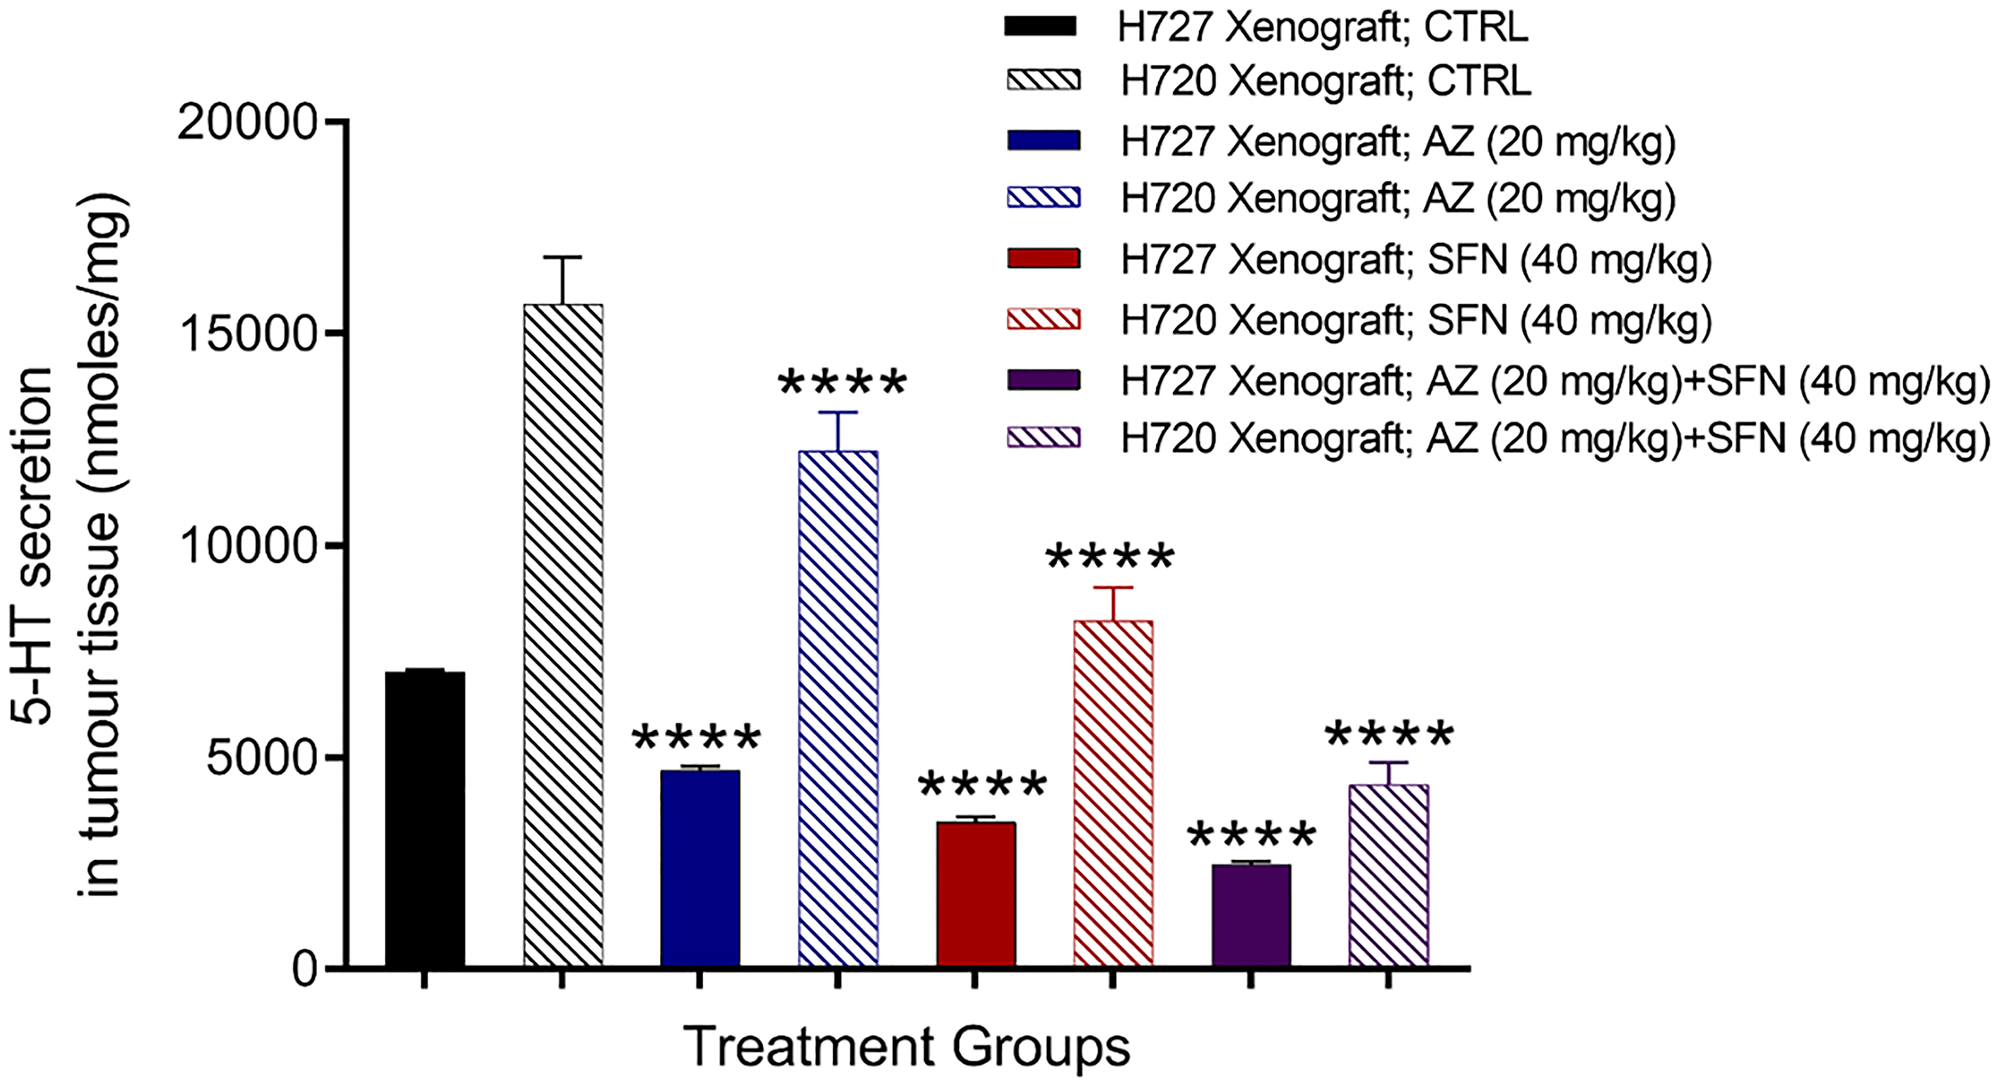 Serotonin 5-HT expression in atypical H720 and typical H727 BC xenografts taken from NOD/SCID mice following treatment with AZ (20 mg/mL), SFN (40 mg/mL), and their combination using the carbon fiber amperometry assay and standard 5-HT calibration curve.